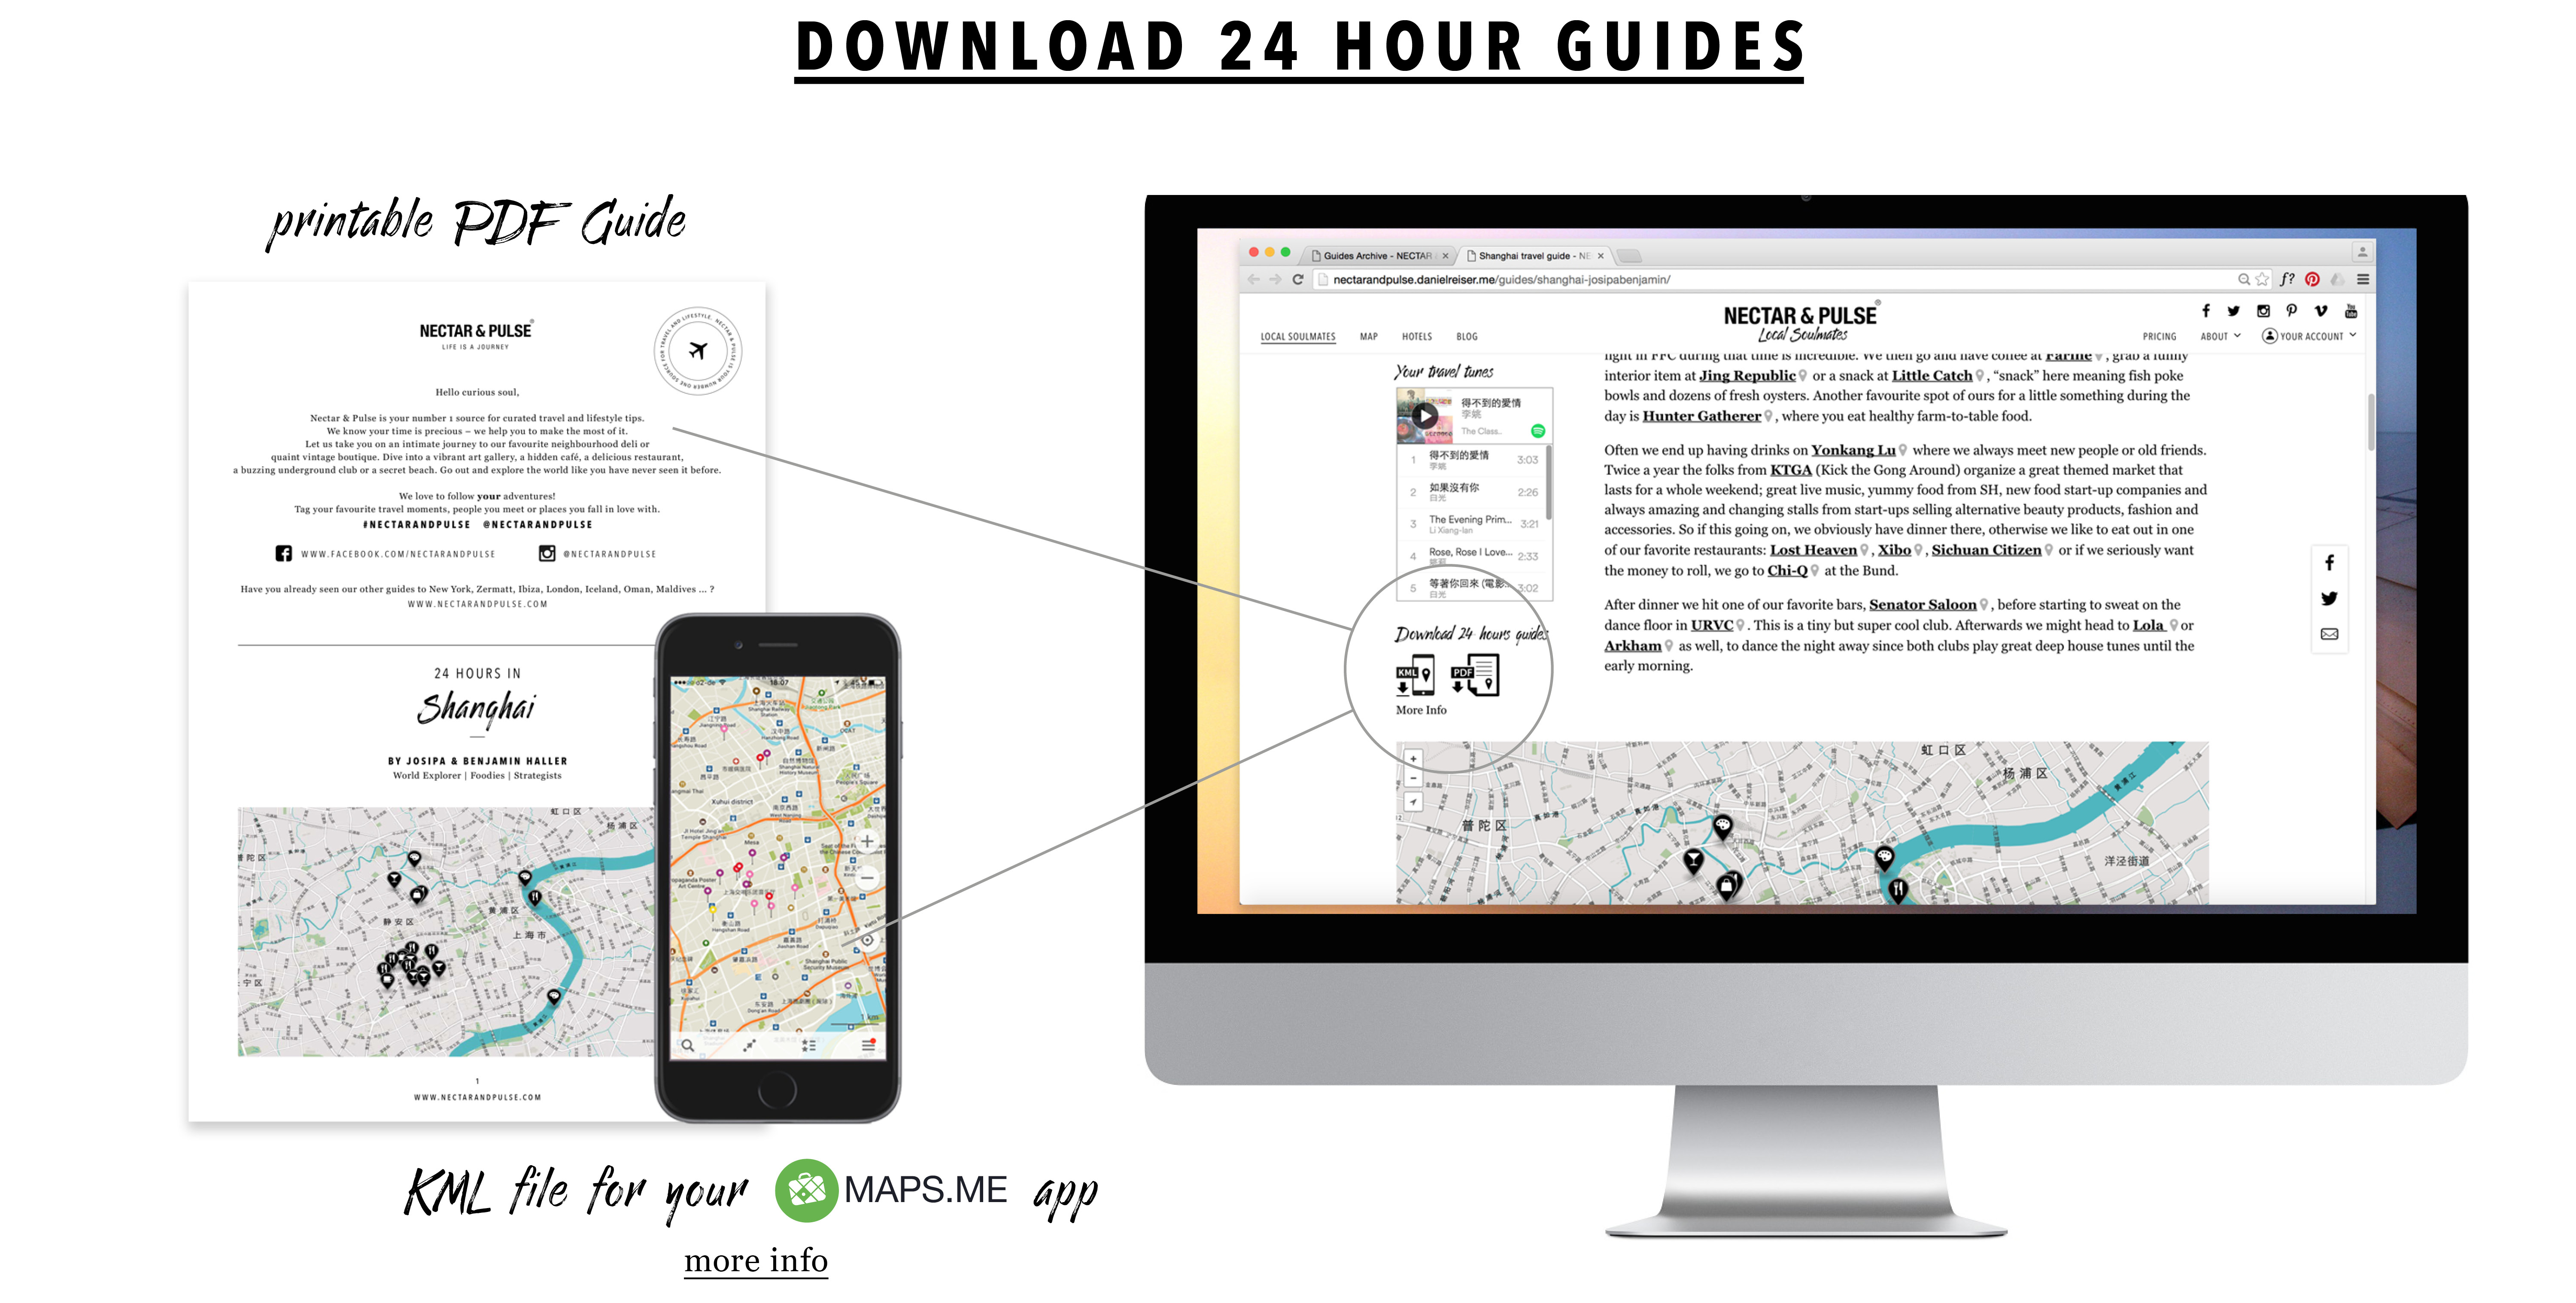 download24guides